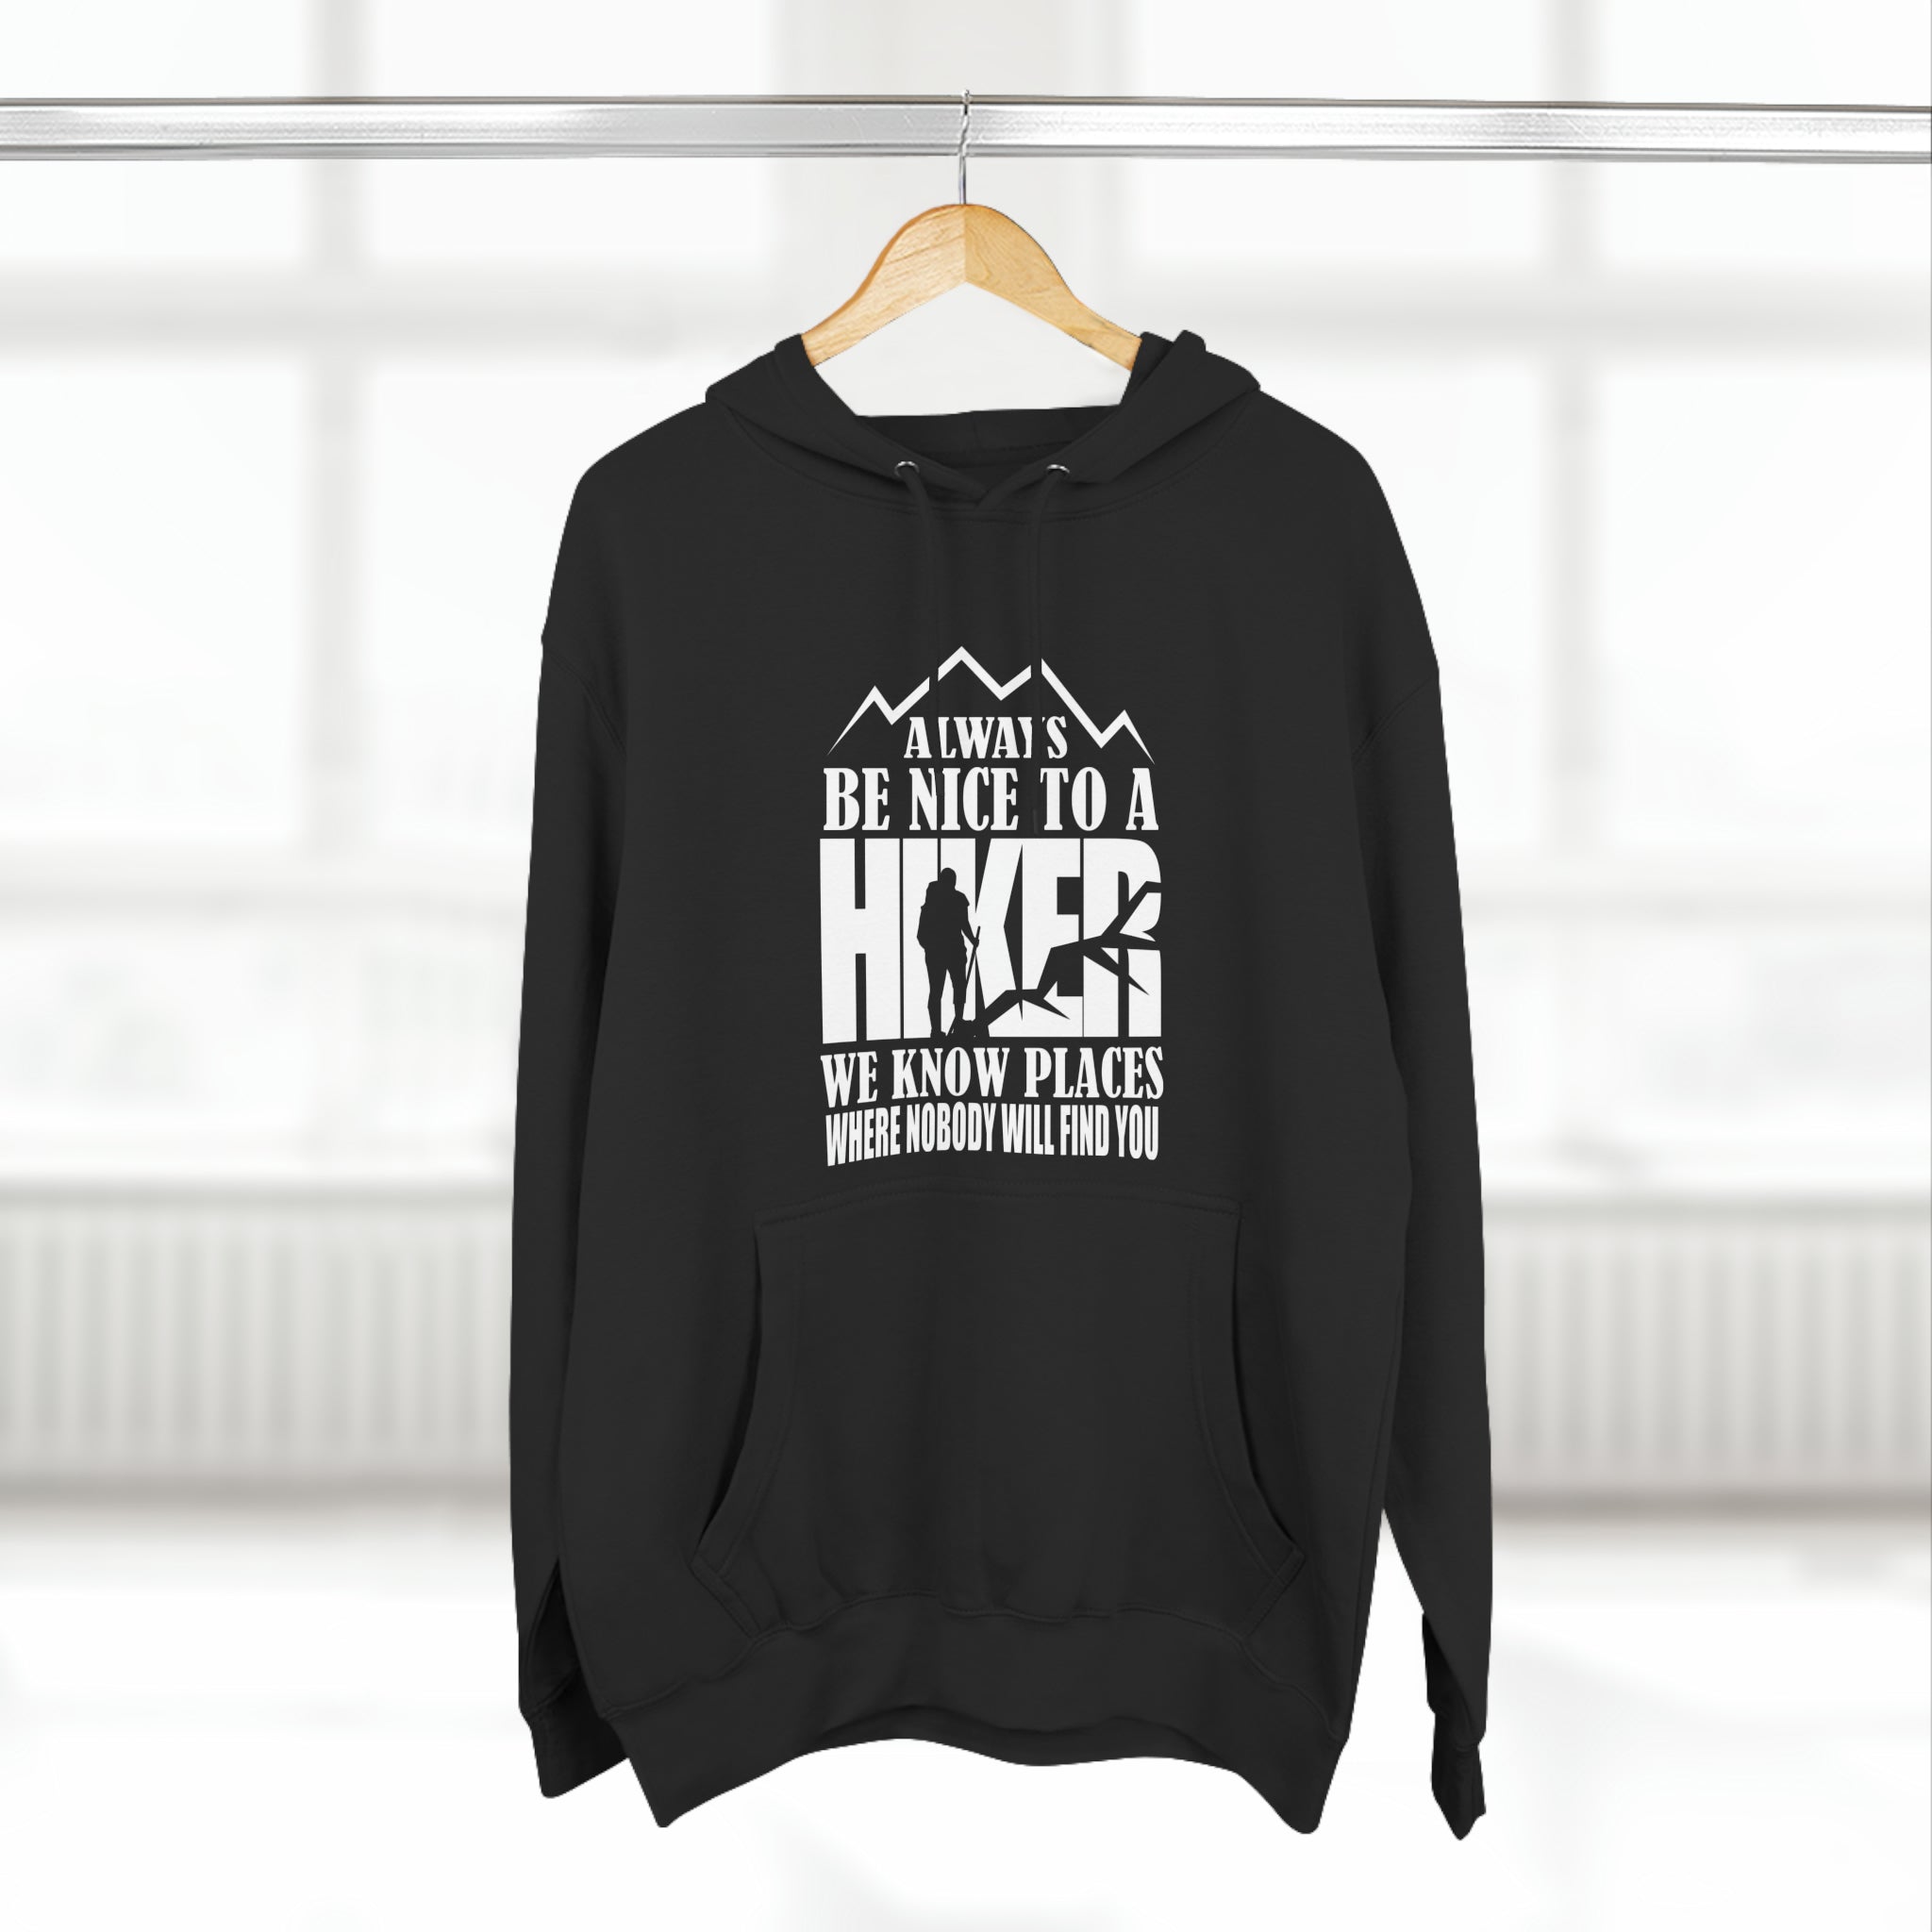 BE NICE TO A HIKER SOFT STYLE HOODIE